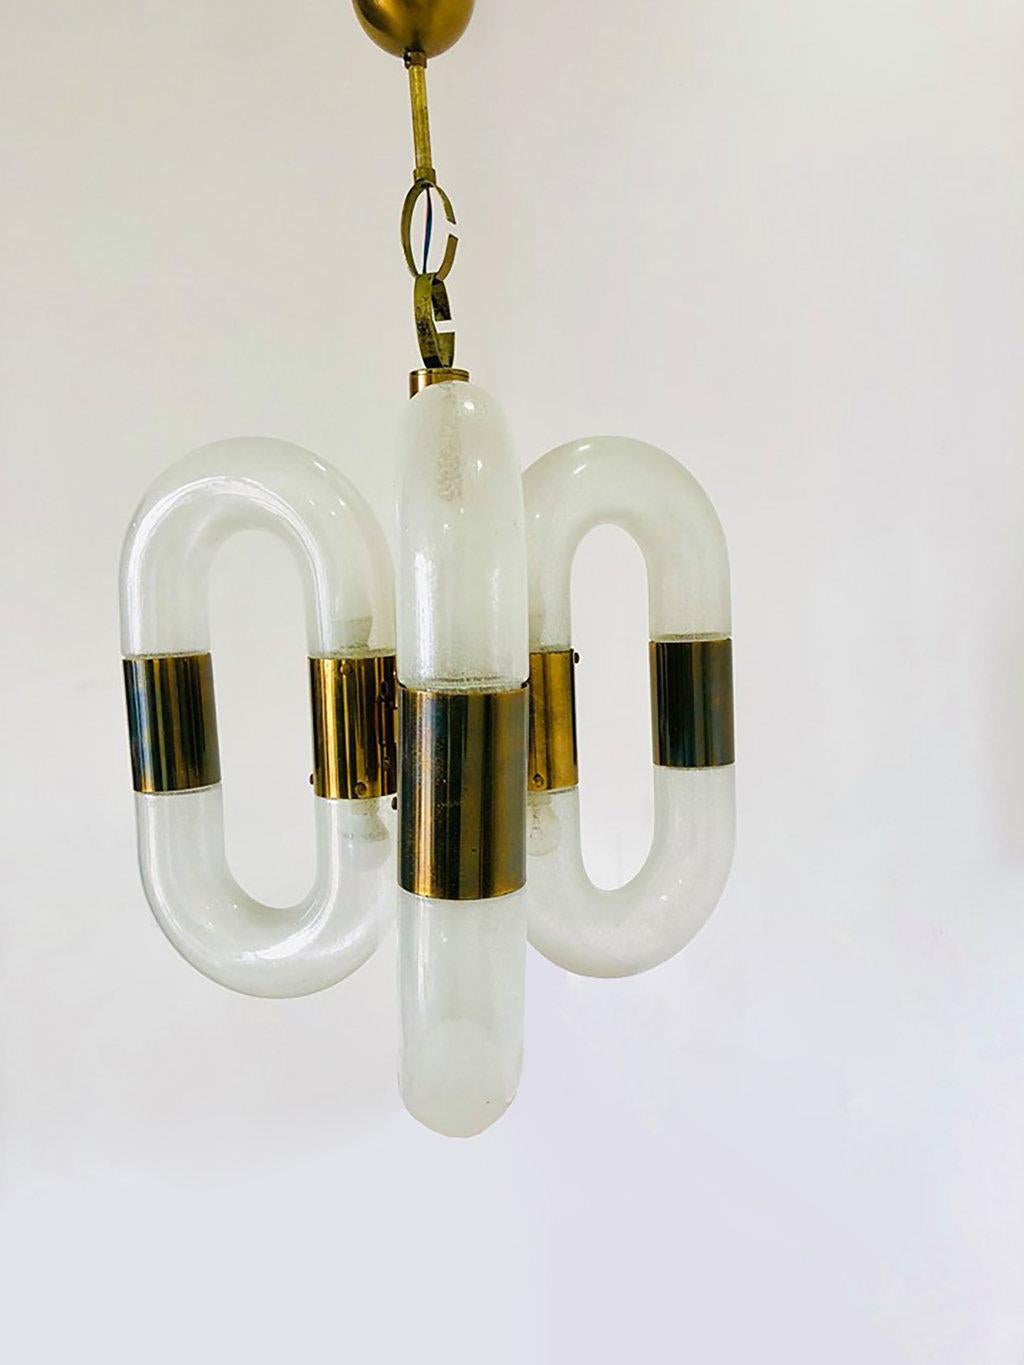 This brass and Murano glass chandelier is an original decorative object designed by the Italian glassworker Aldo Nason and realized by the prestigious glass factory Mazzega in Venice in the 1970s.

This elegant chandelier is made of brass and